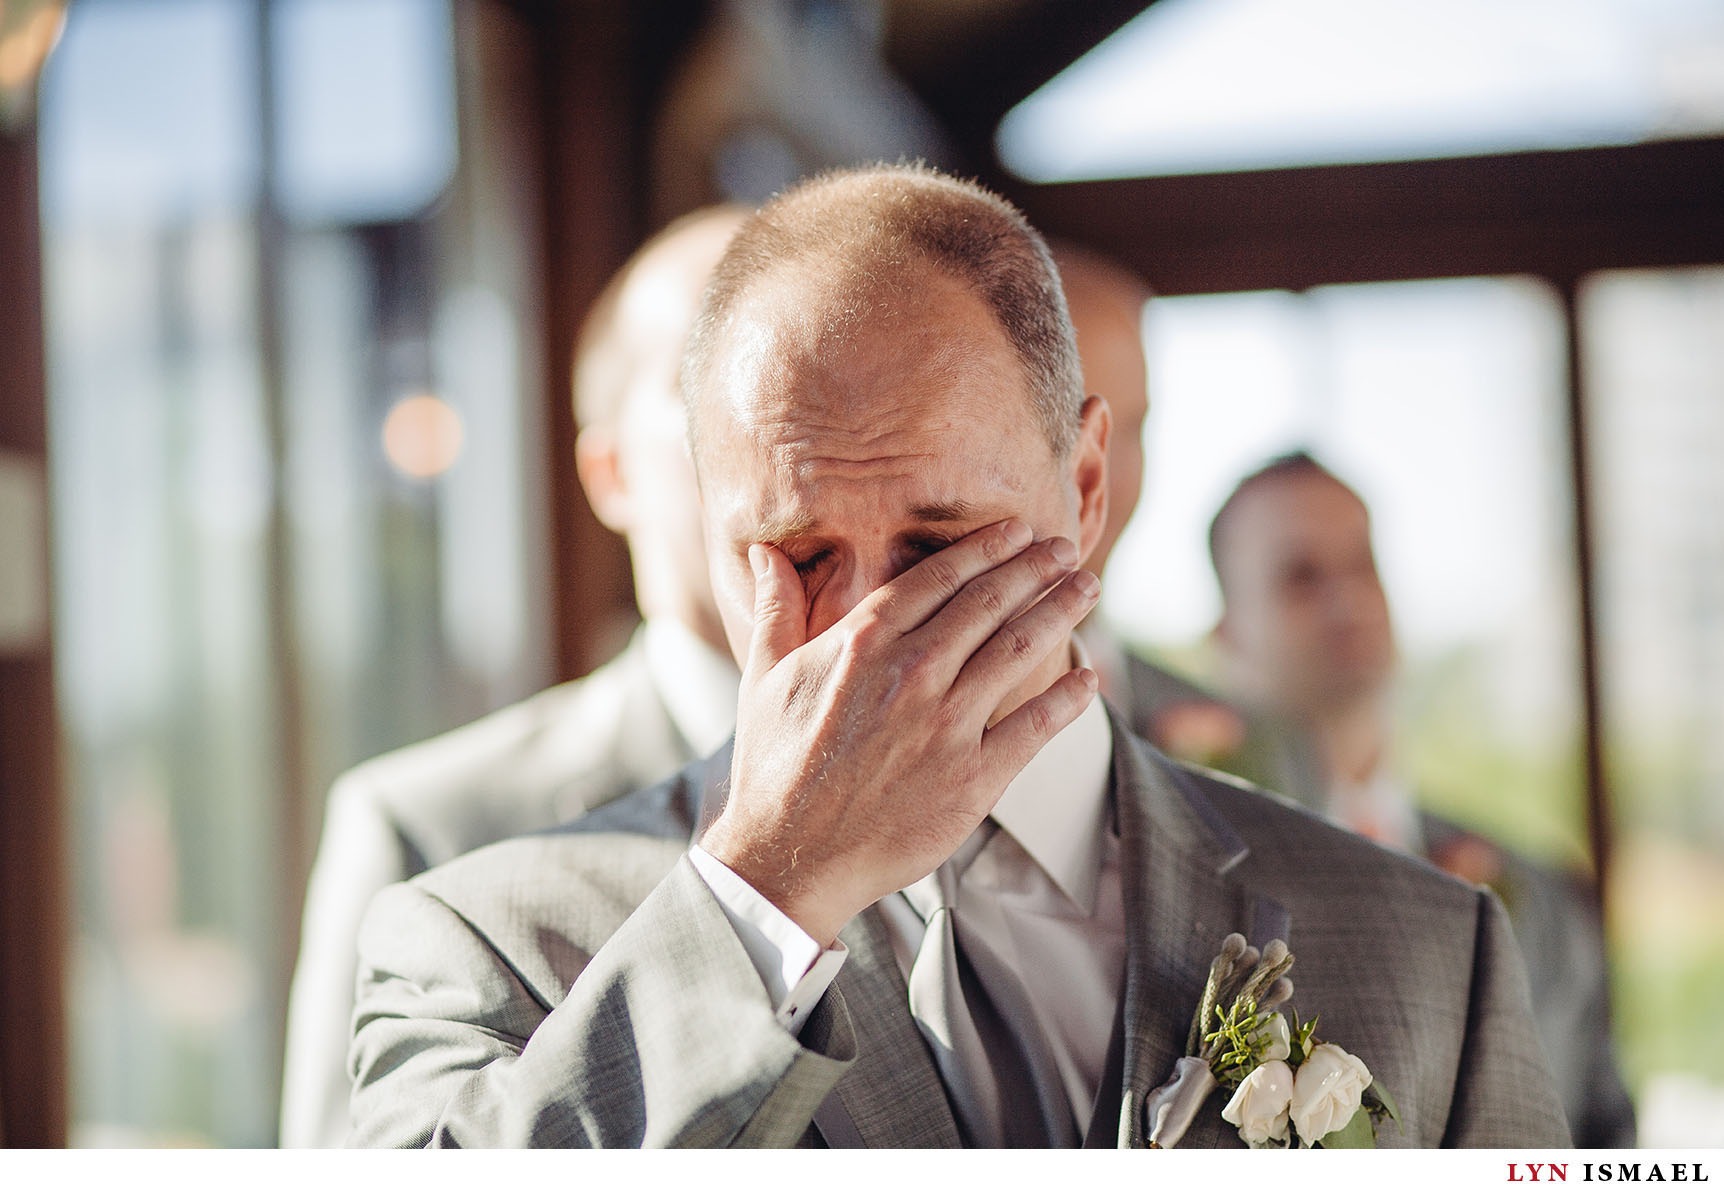 A groom gets emotional as he sees his bride walk down the aisle at the Cambridge Mill.